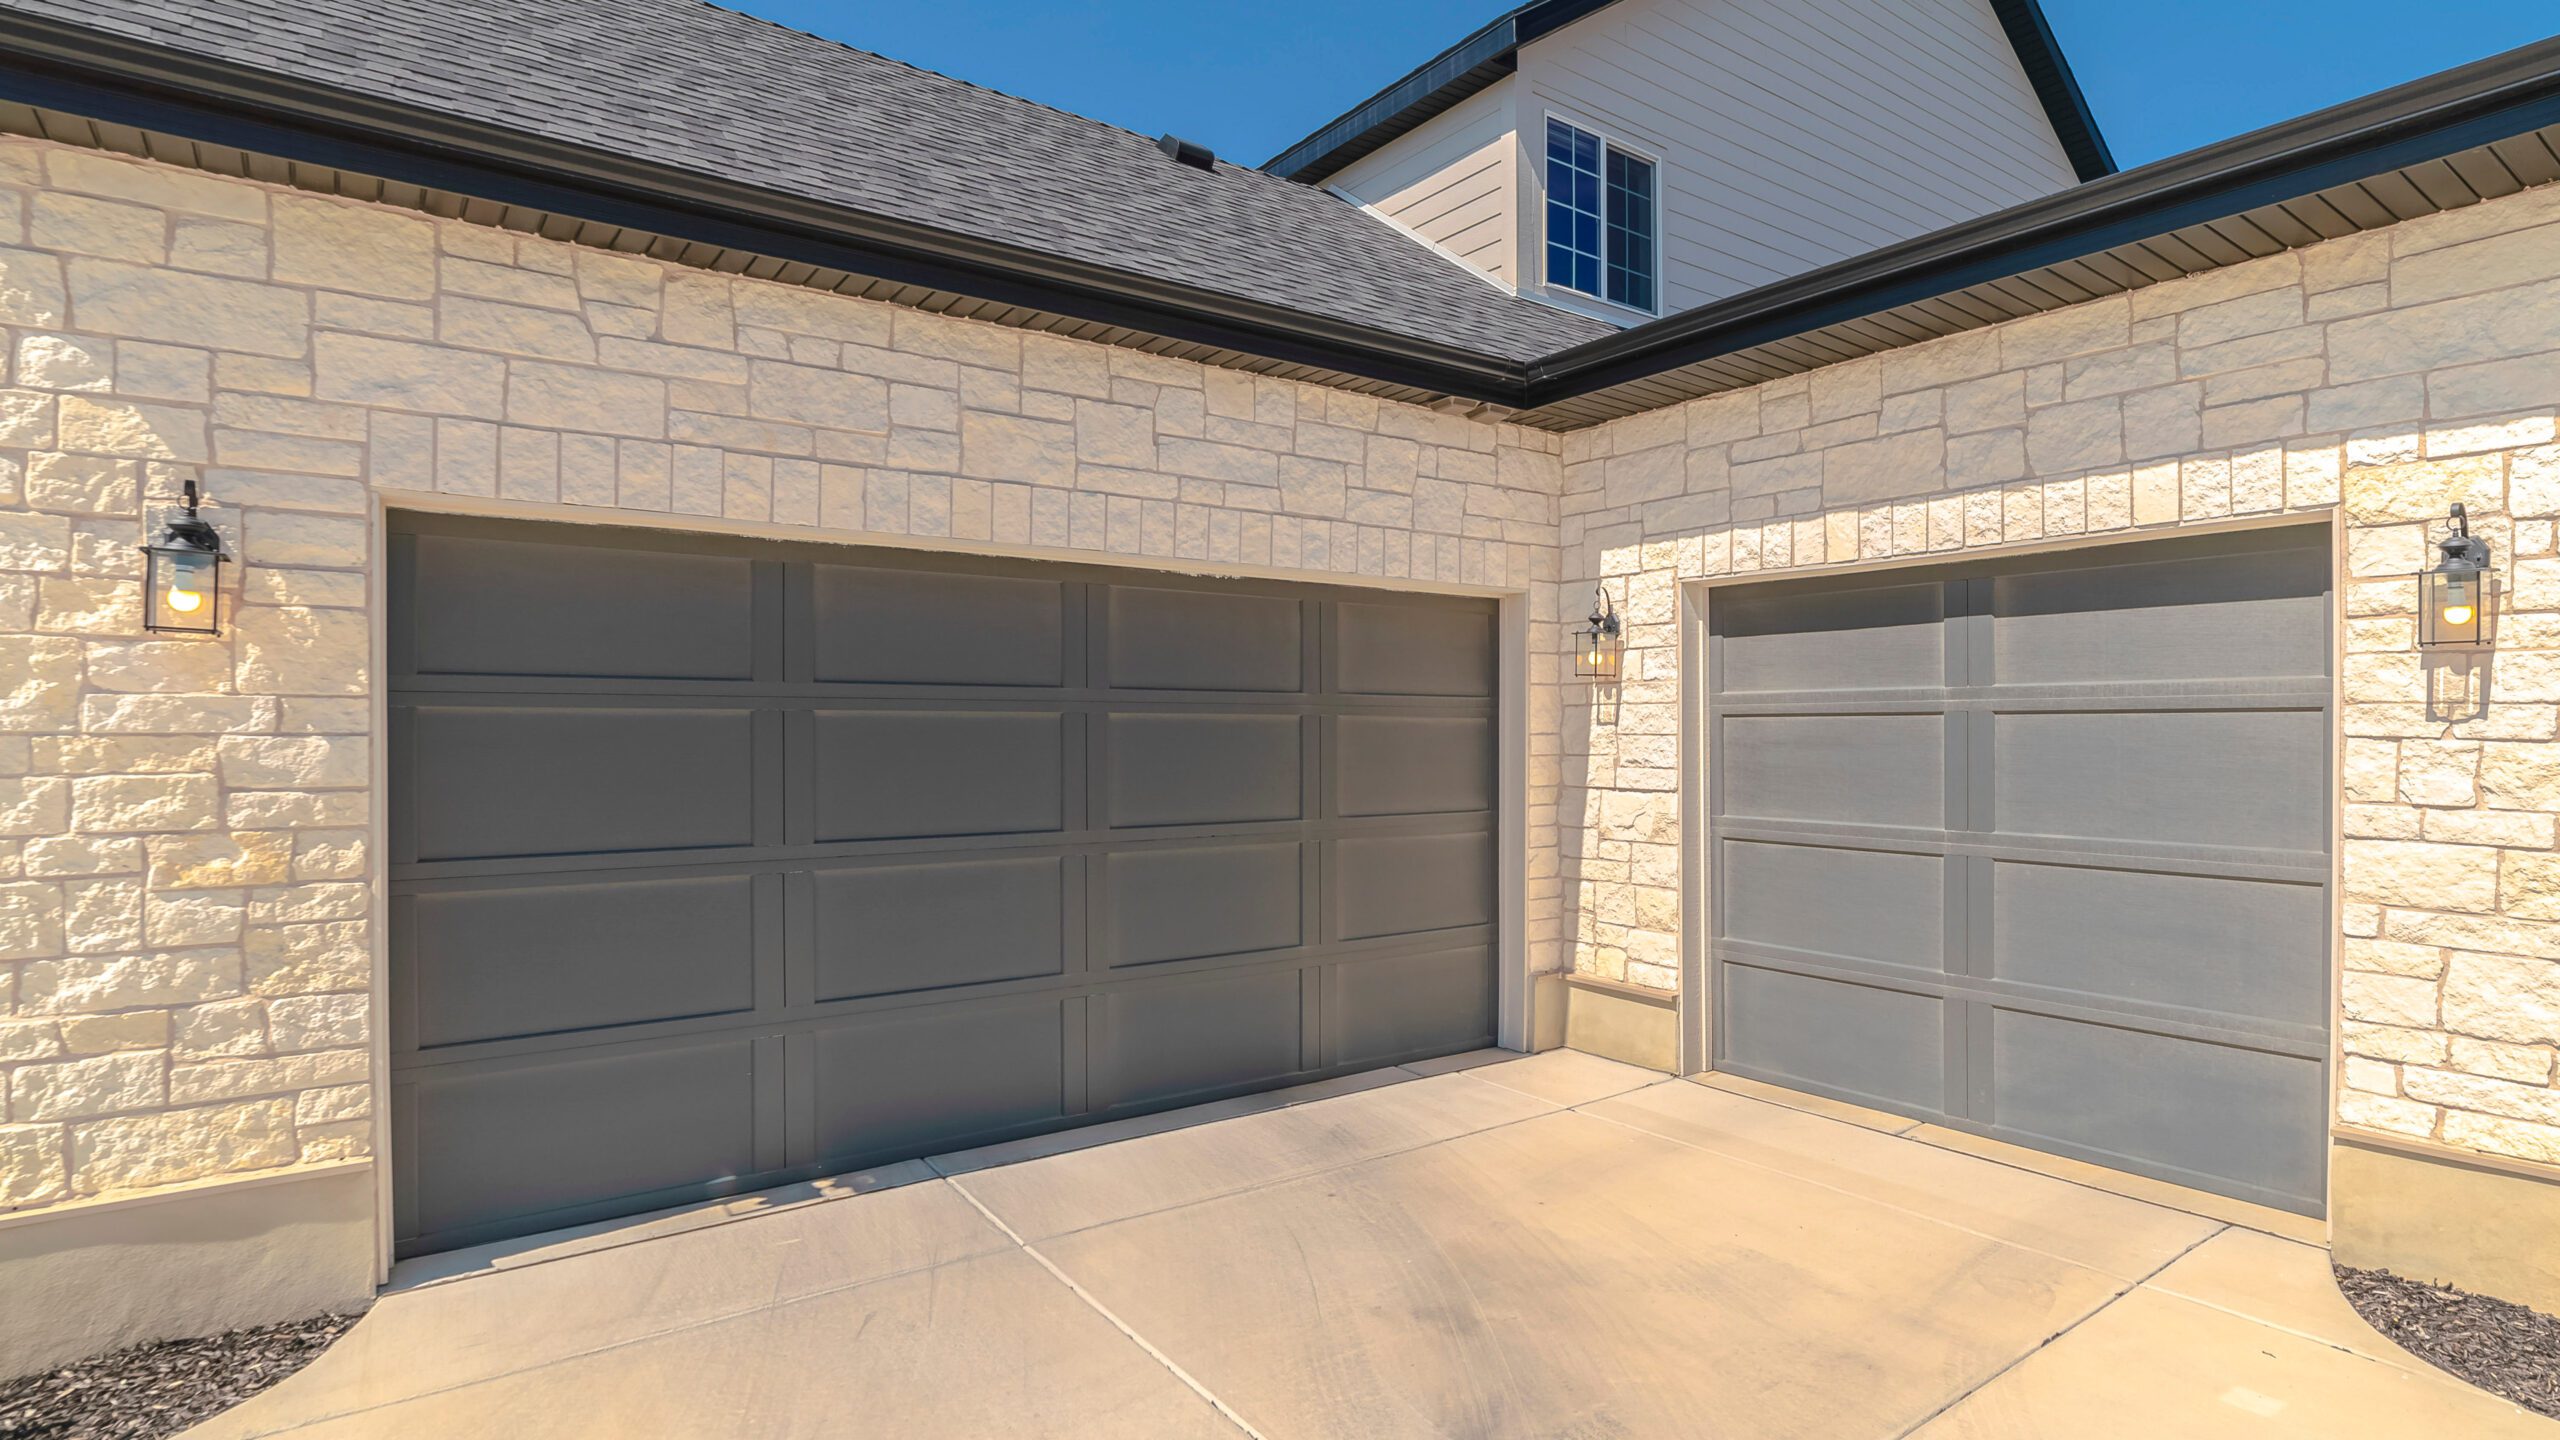 Need garage door repair in Saratoga Springs, Utah? Contact the experts at Affordable Garage Door Fix for a quote on your garage repair.